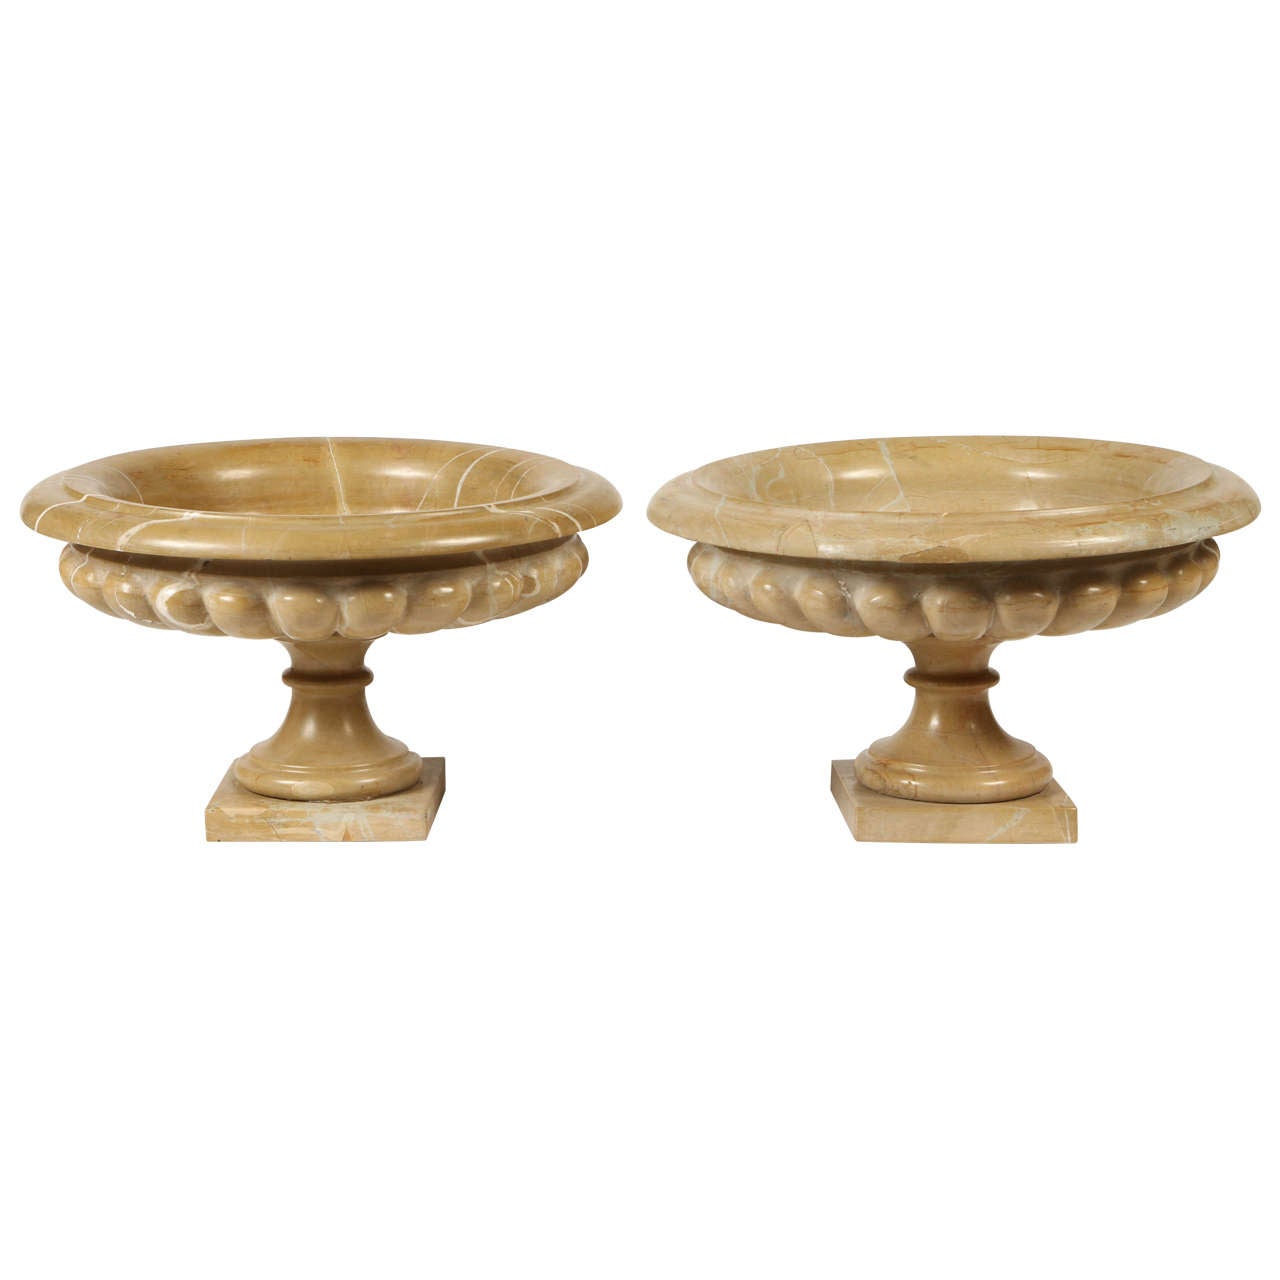 Pair of Neoclassical Style Veined Caramel Colored Marble Tazzas